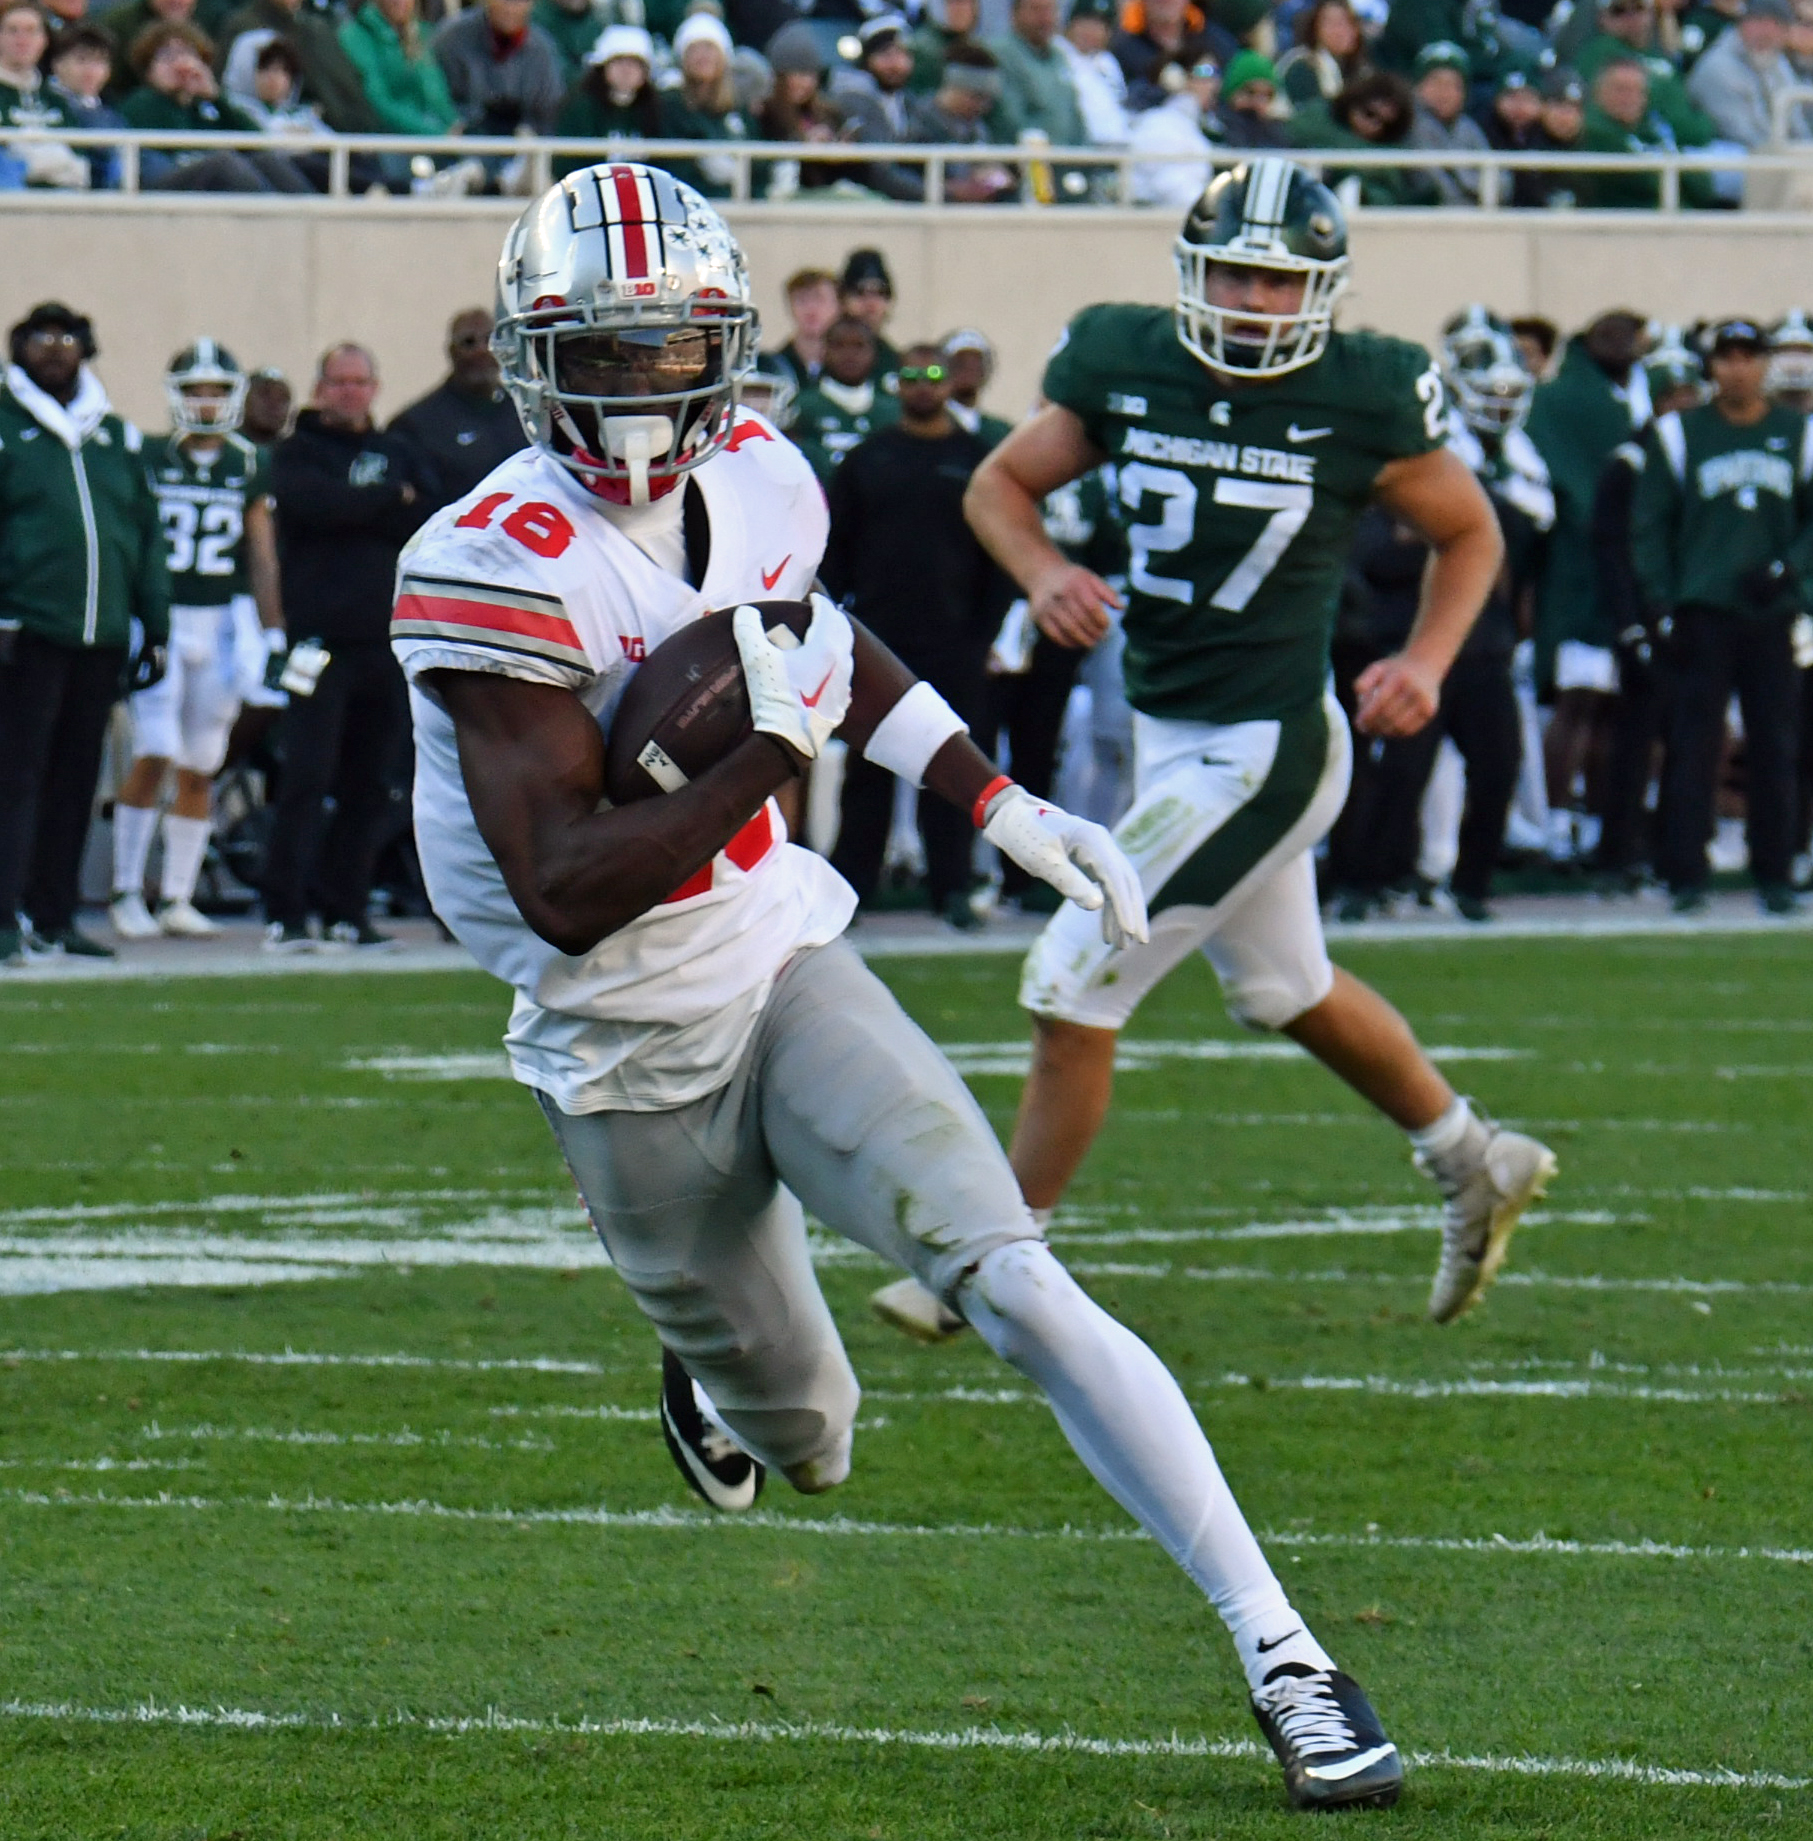 Marvin Harrison Jr. Becomes the First Offensive Player in Ohio